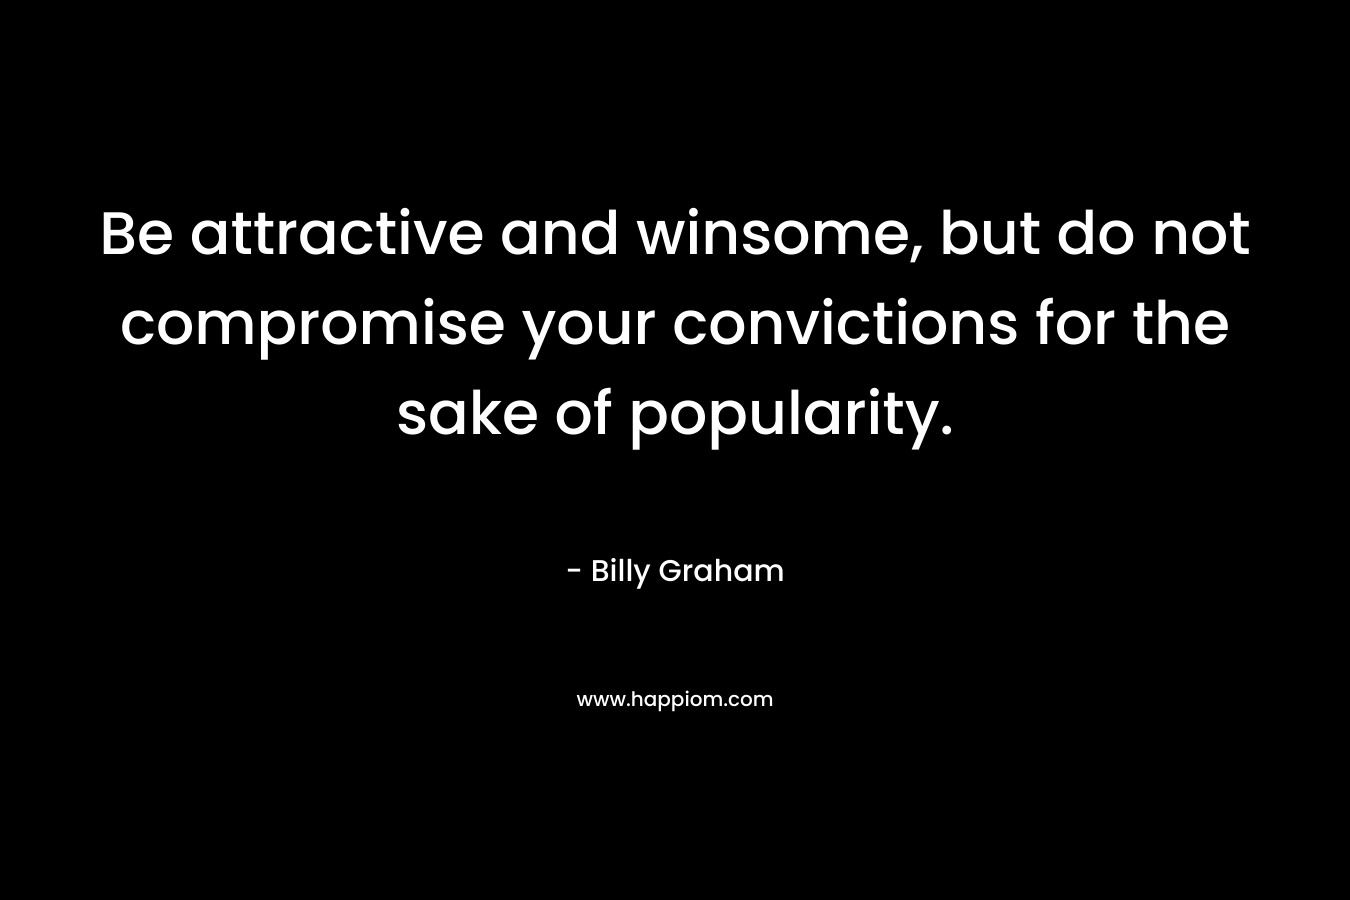 Be attractive and winsome, but do not compromise your convictions for the sake of popularity.